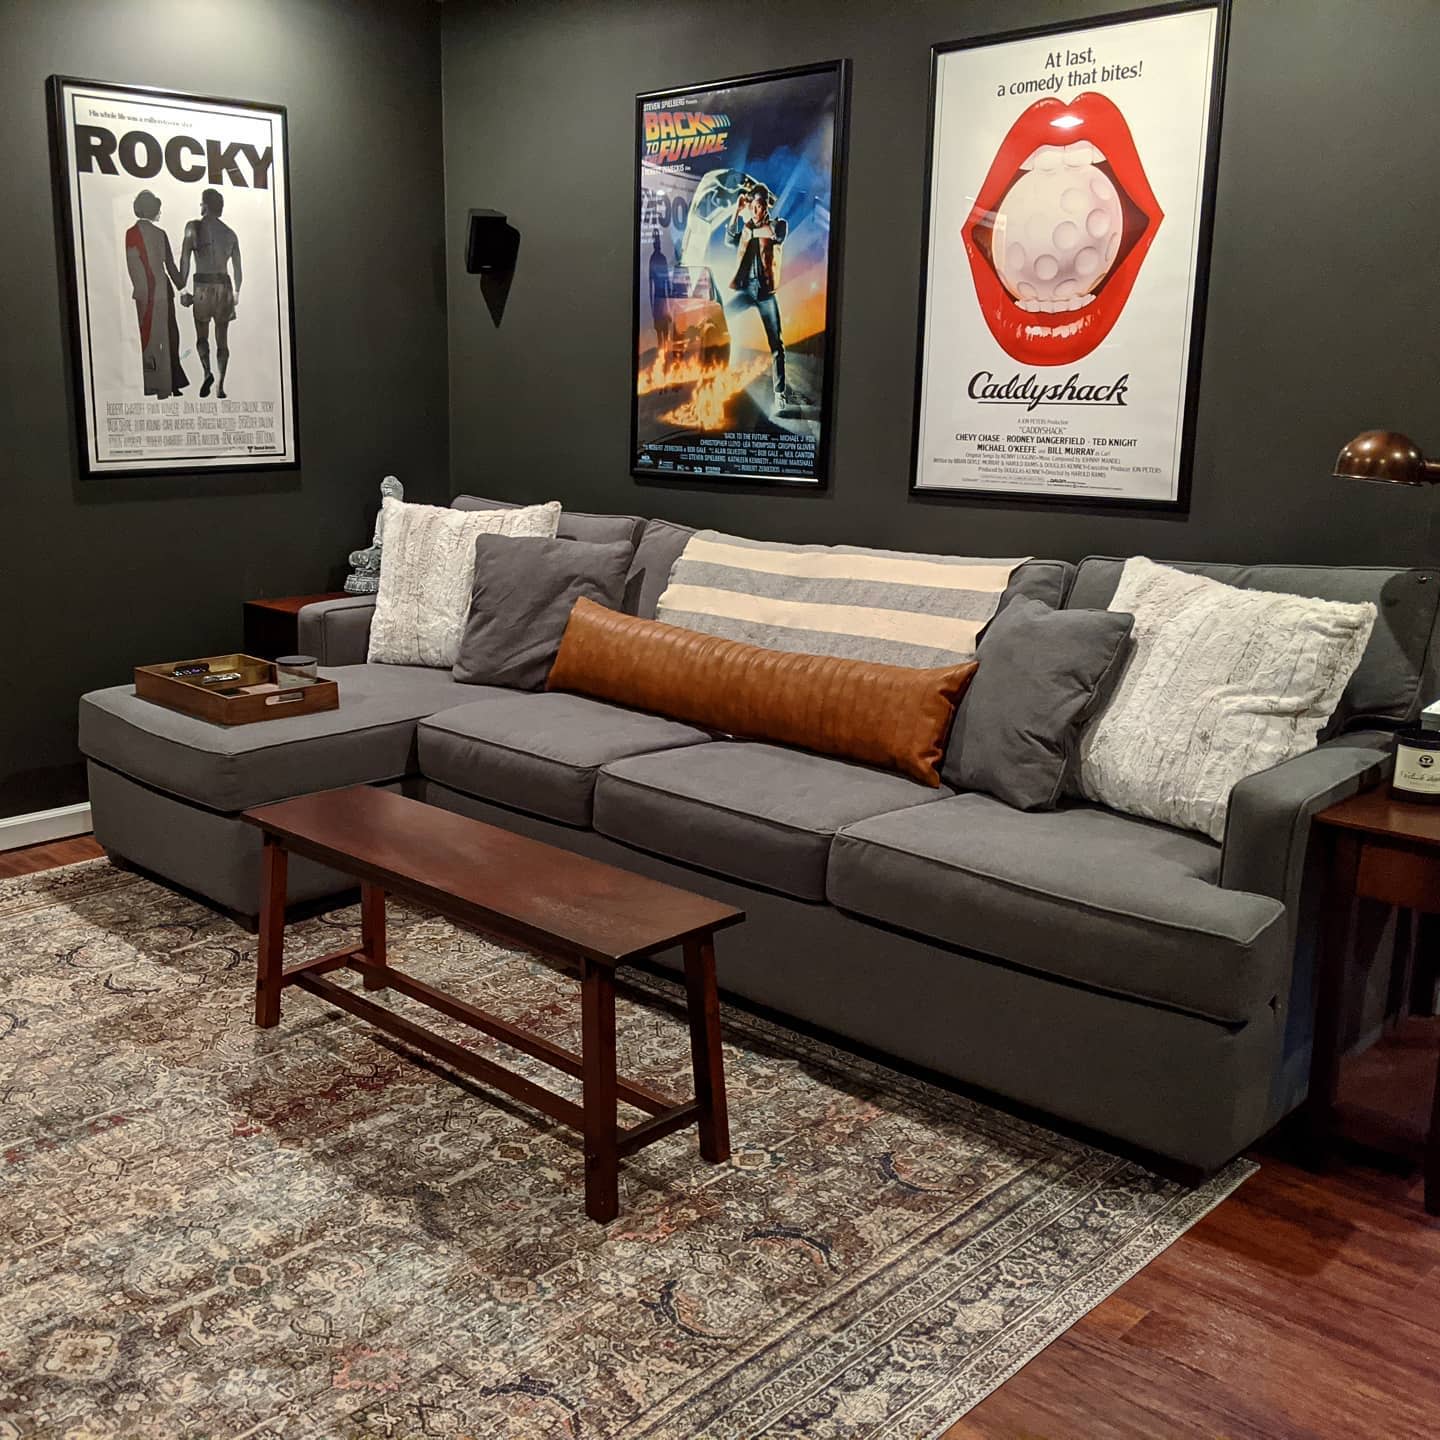 lounge room with movie poster artwork